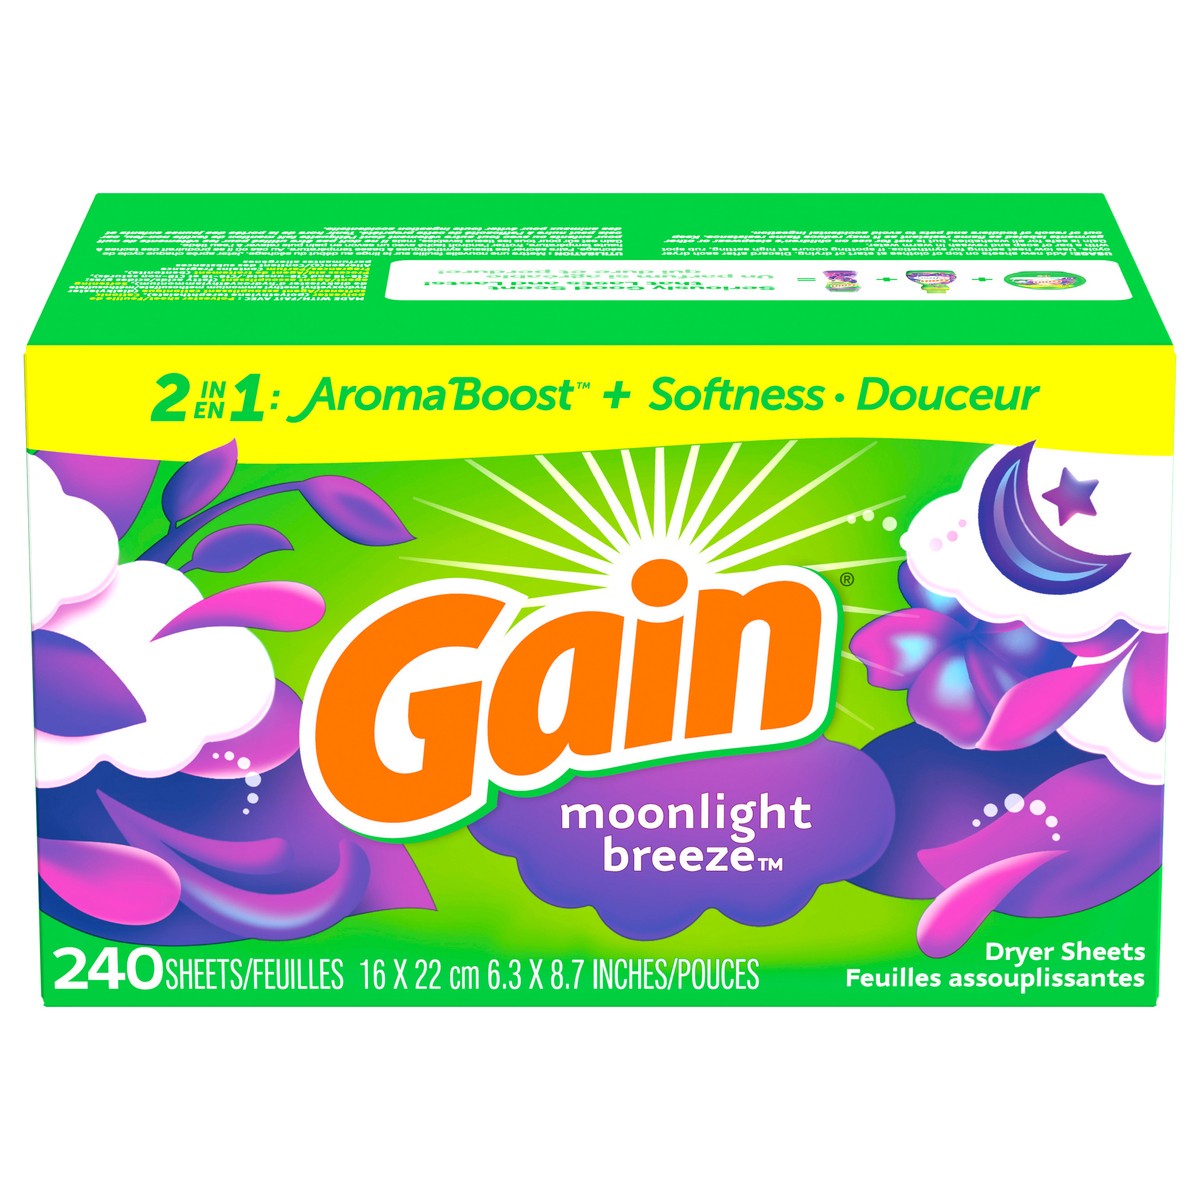 slide 1 of 12, Gain dryer sheets, 240 Count, Moonlight Breeze Scent Laundry Fabric Softener Sheets with 2-in-1 Aromaboost Plus Softness, 240 ct